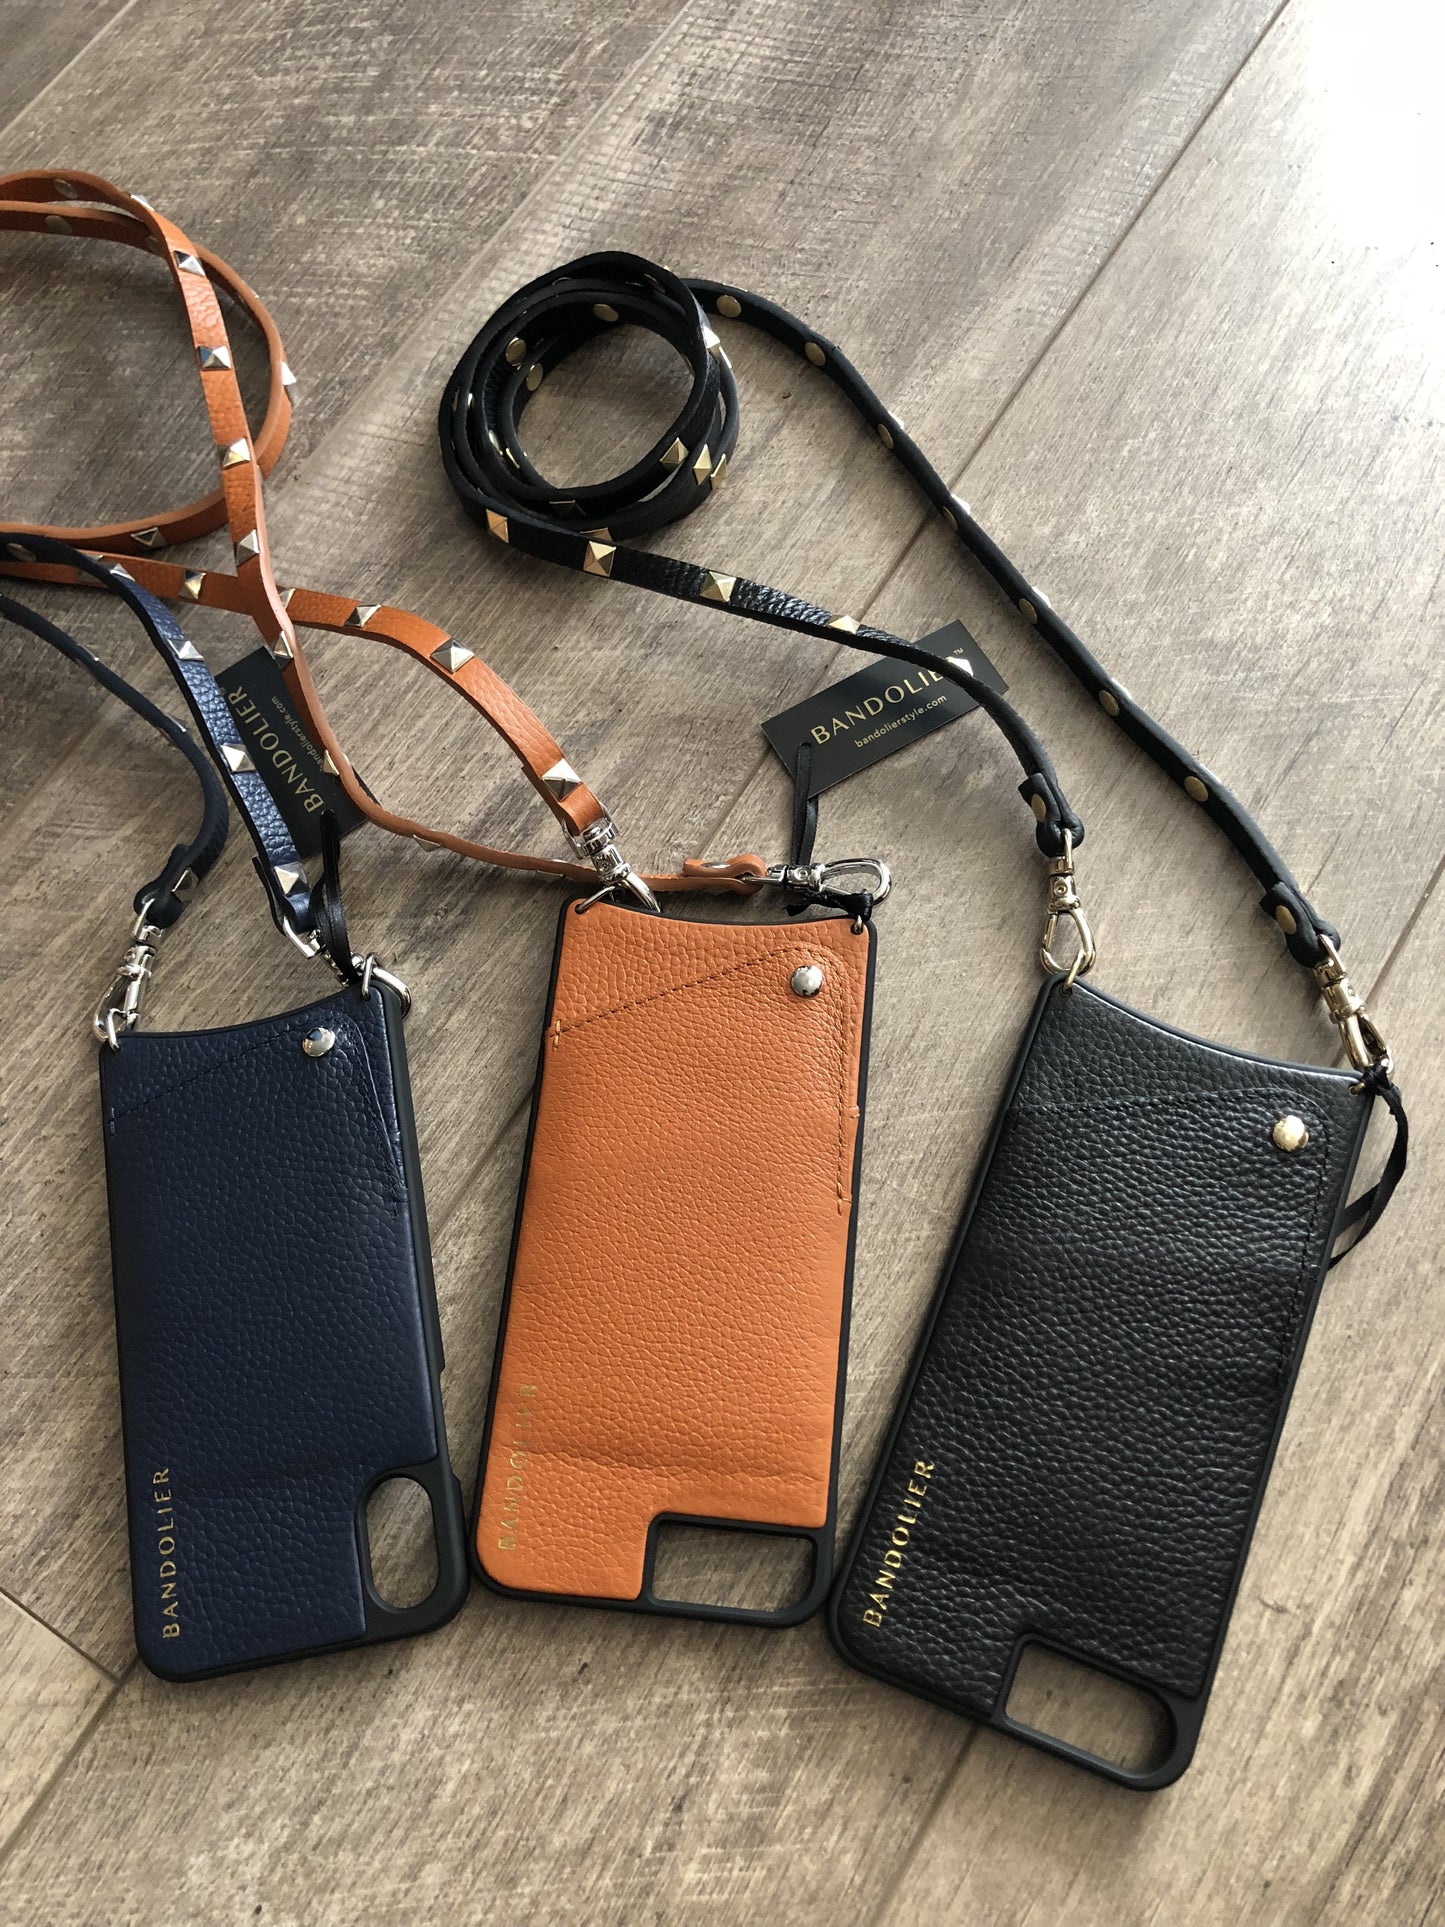 Shop Bandolier Plain Leather iPhone X iPhone XS iPhone XS Max iPhone XR by  SpringHill